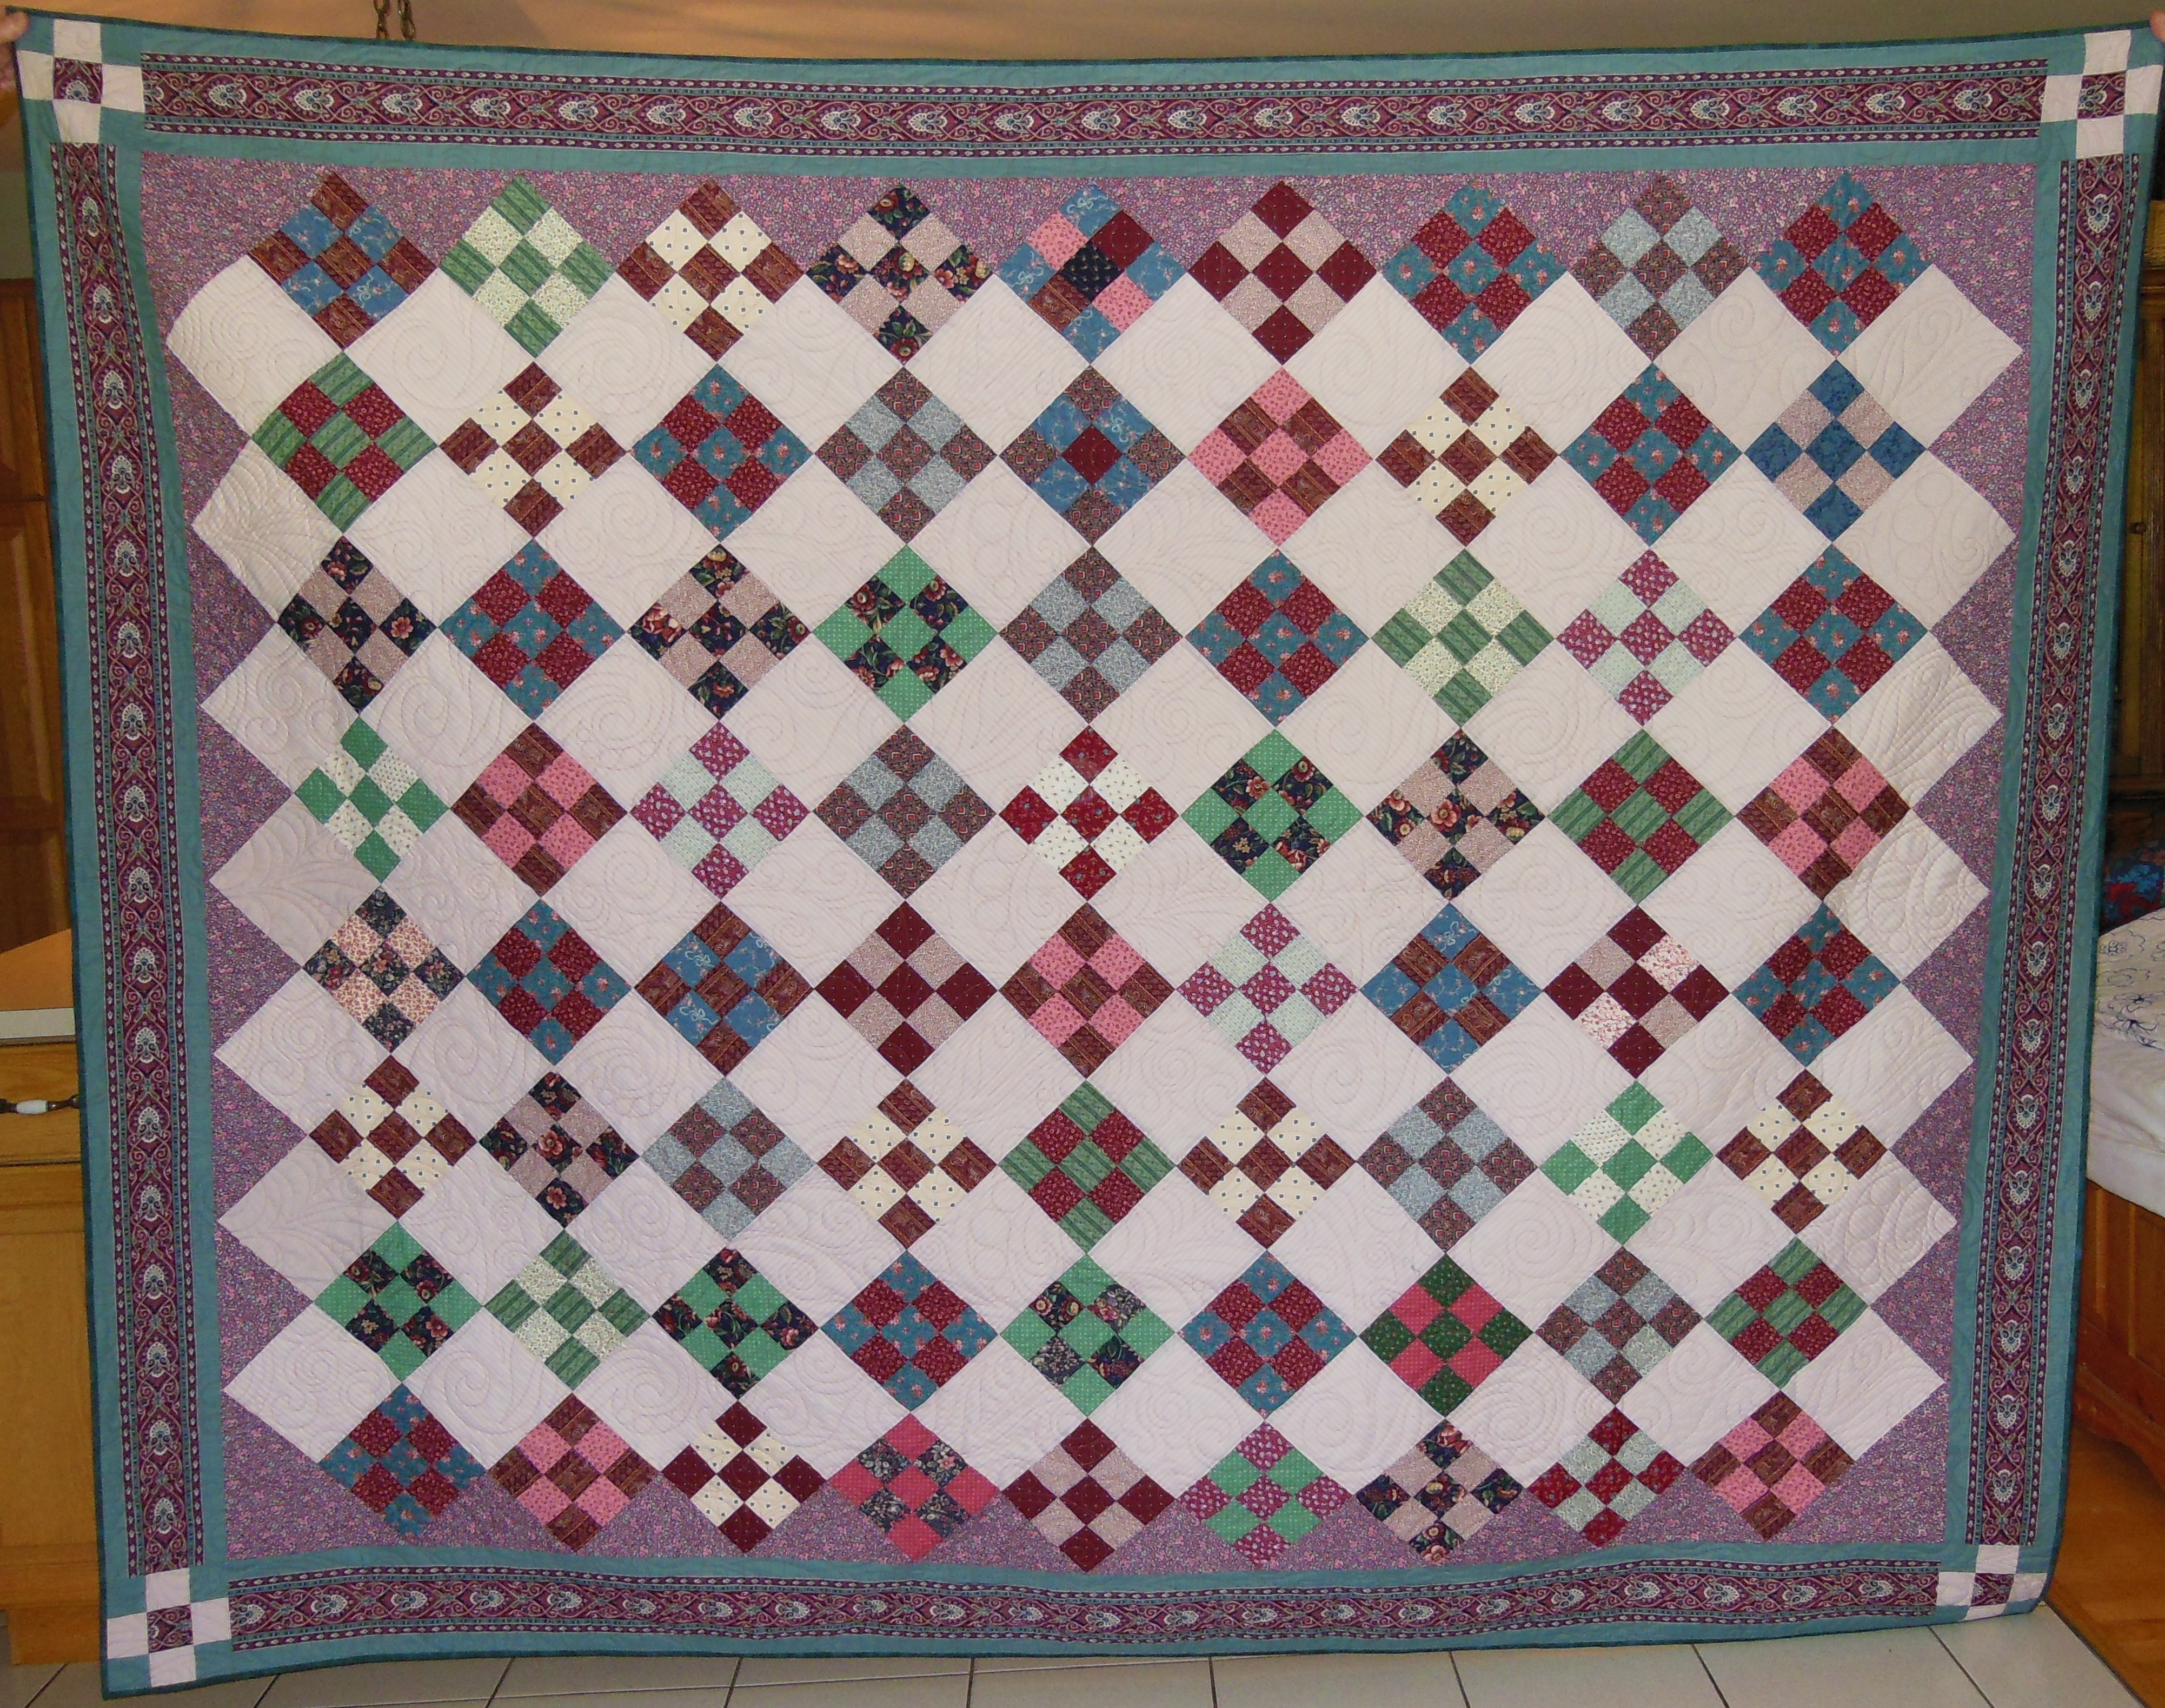 The Nine Patch Quilt